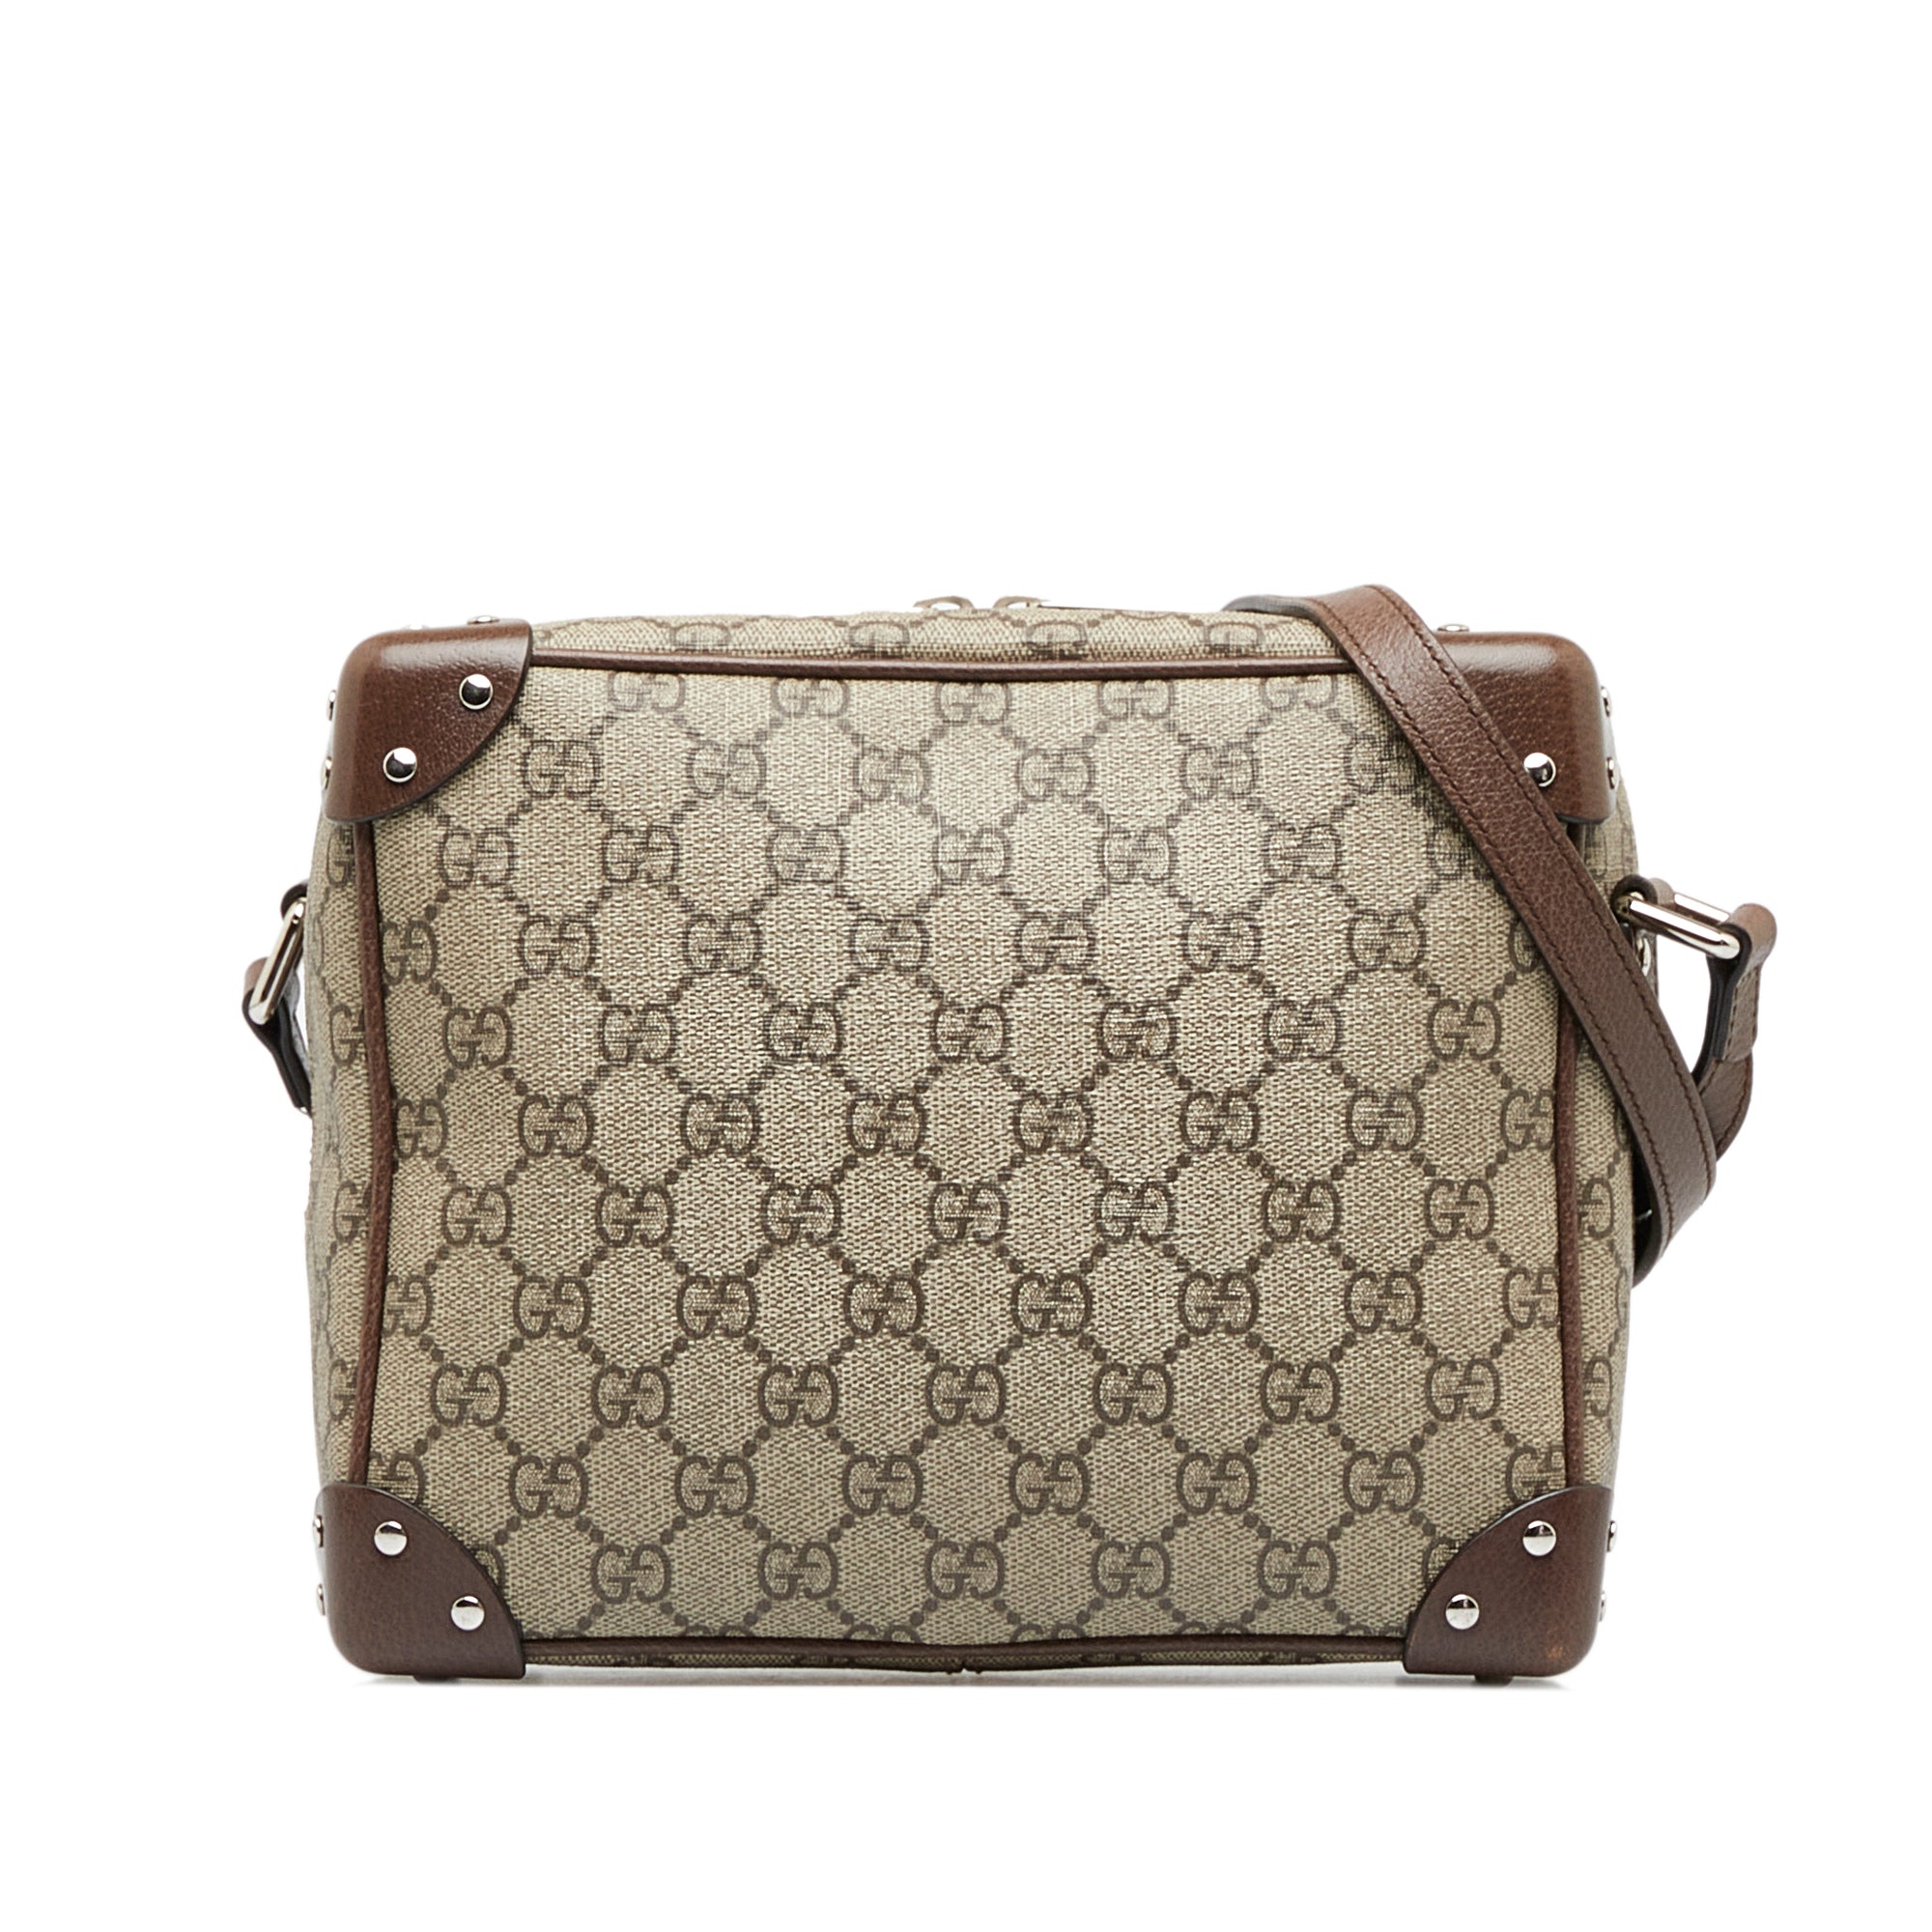 gucci hi top lace up sneaker with interlocking g details, Brown Gucci  Double G Braided Strap Leather Crossbody Bag